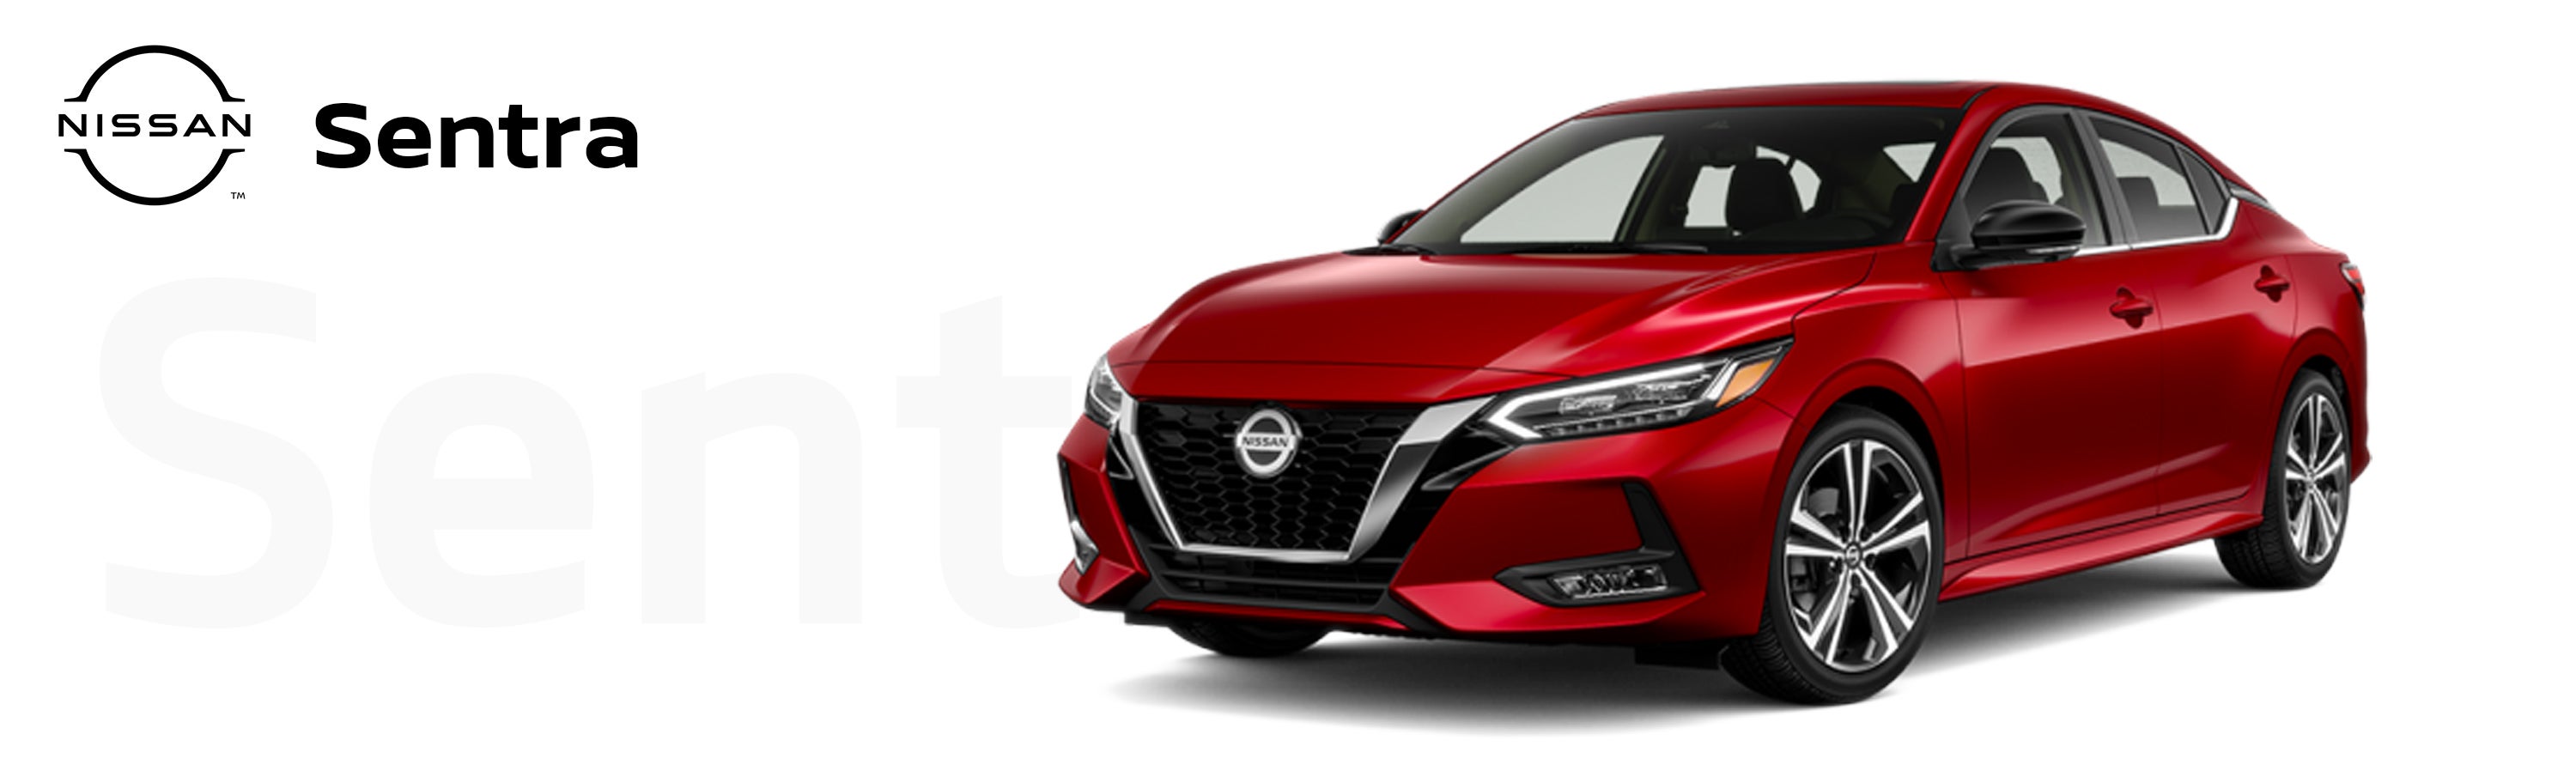 2020 Nissan Sentra at Clay Cooley Nissan of Irving in Irving TX